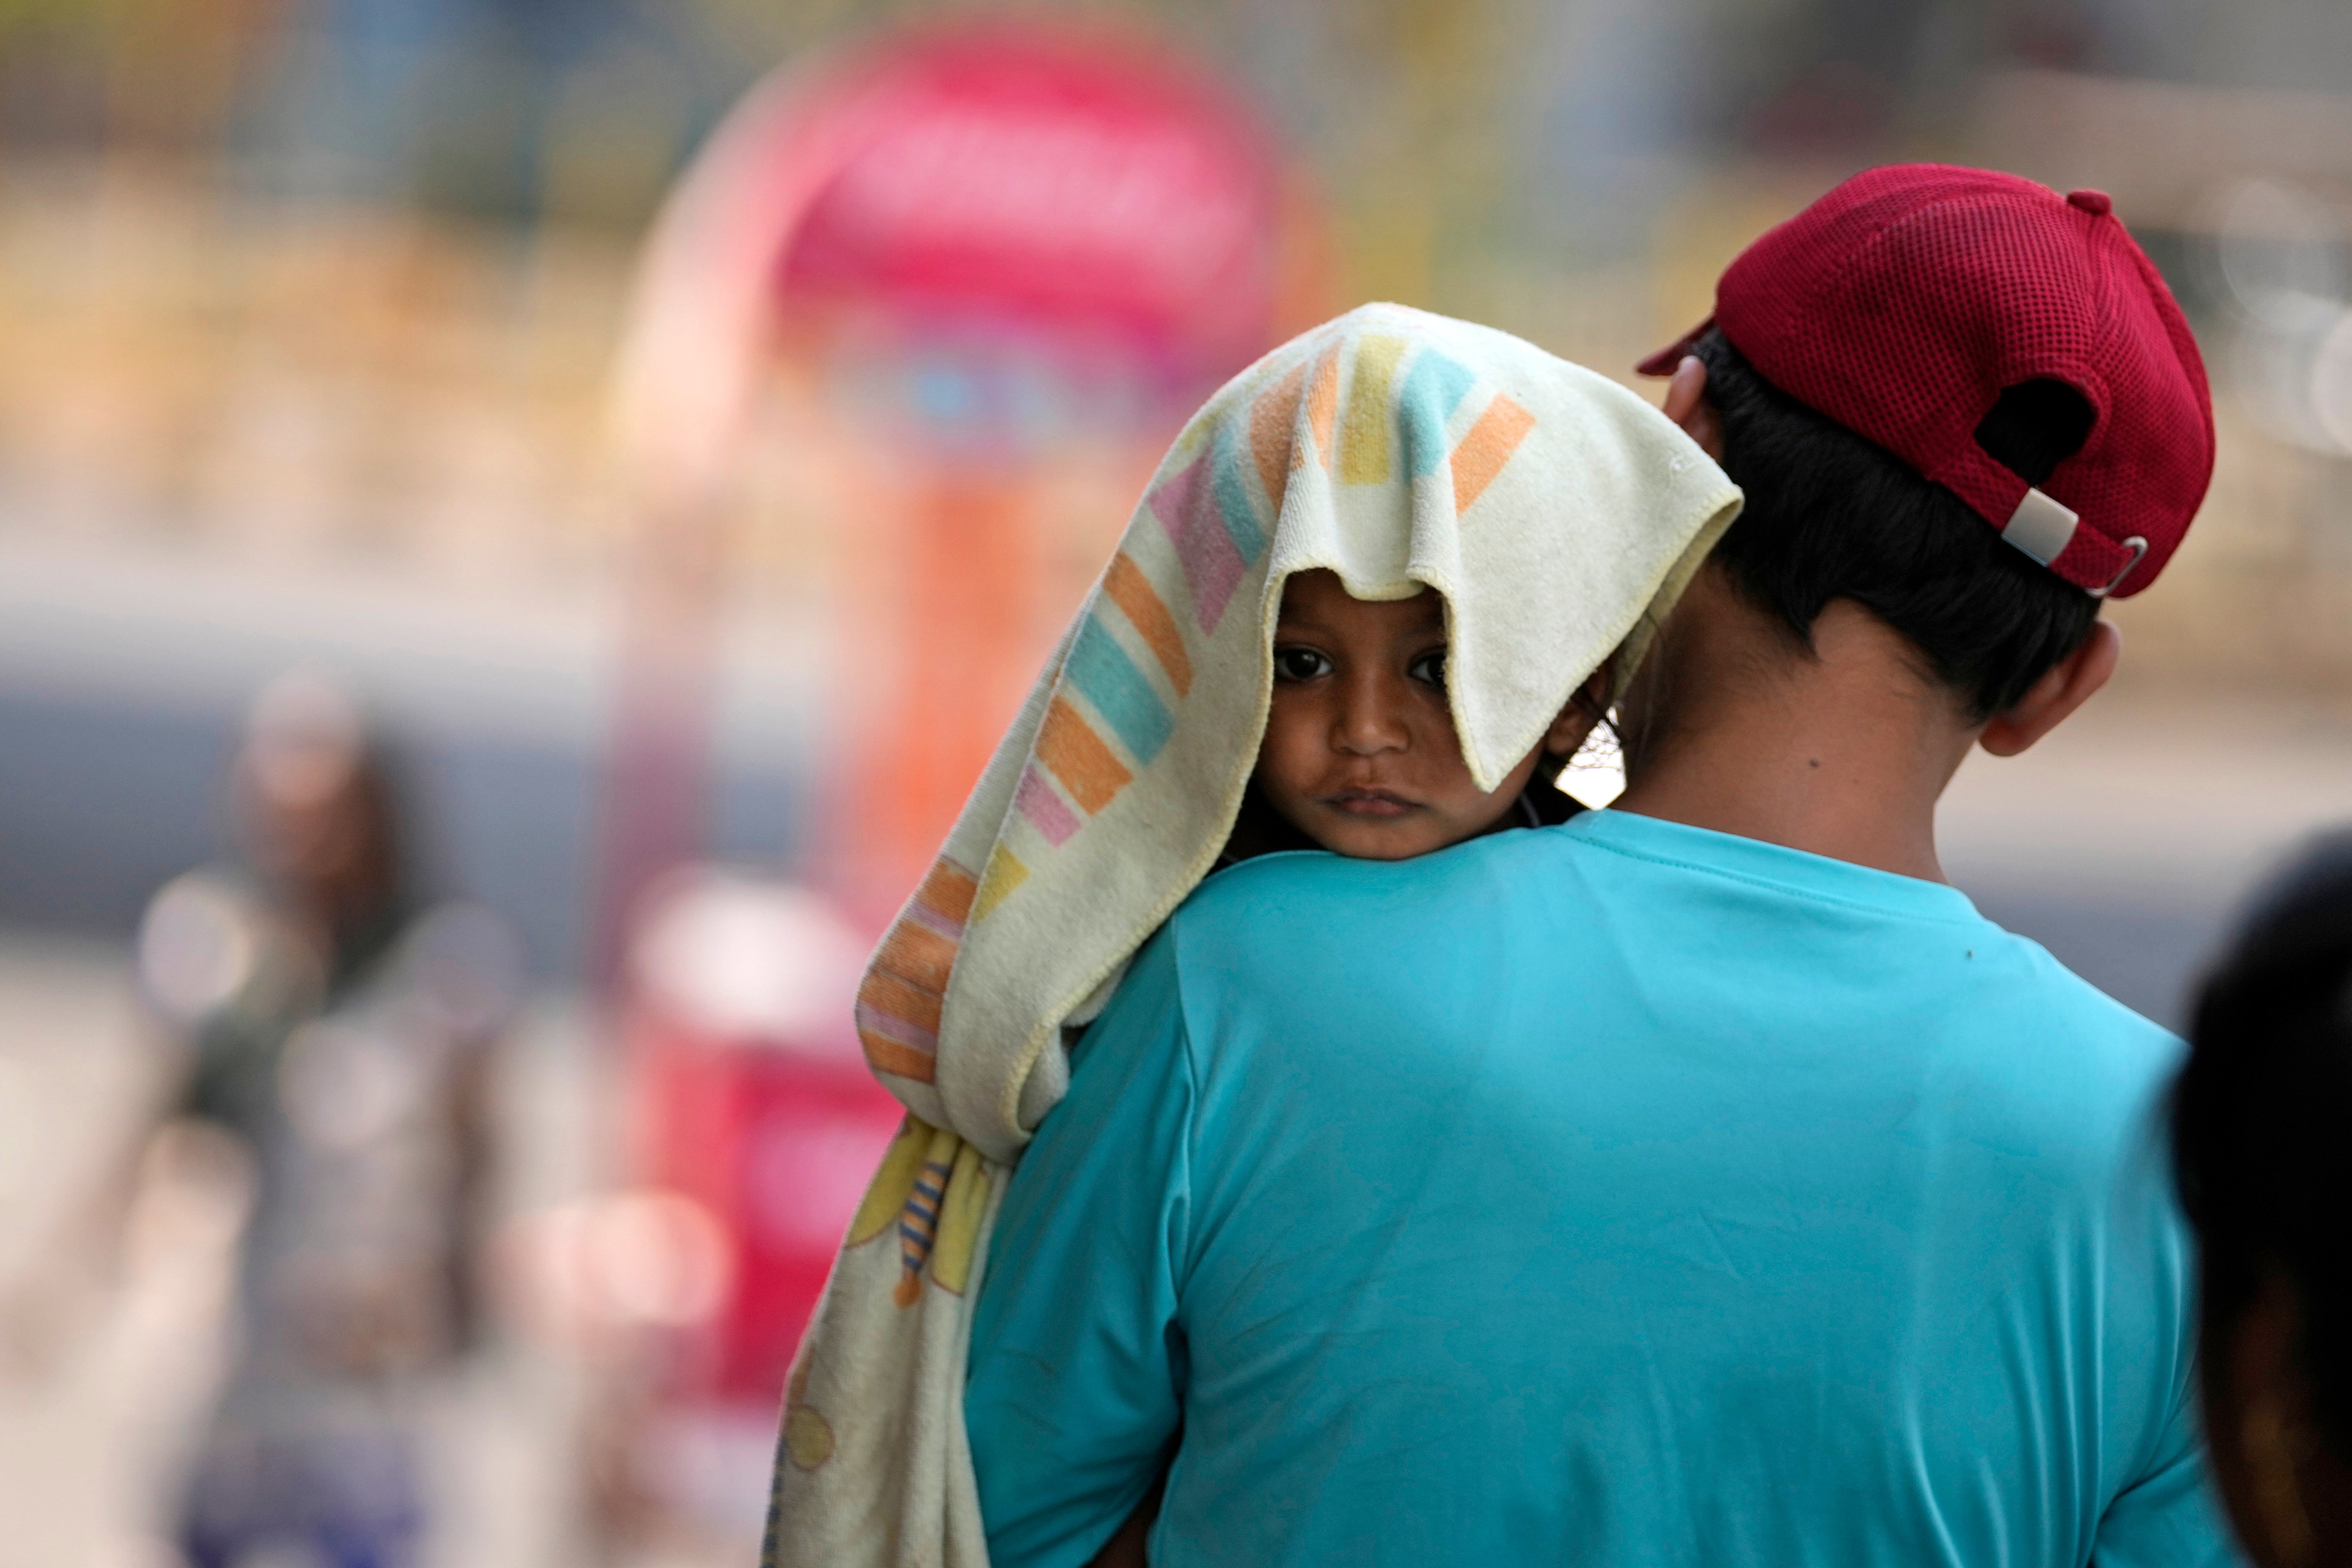 A man carries a child, head covered with a towel to protect from the heat, in Jammu, India